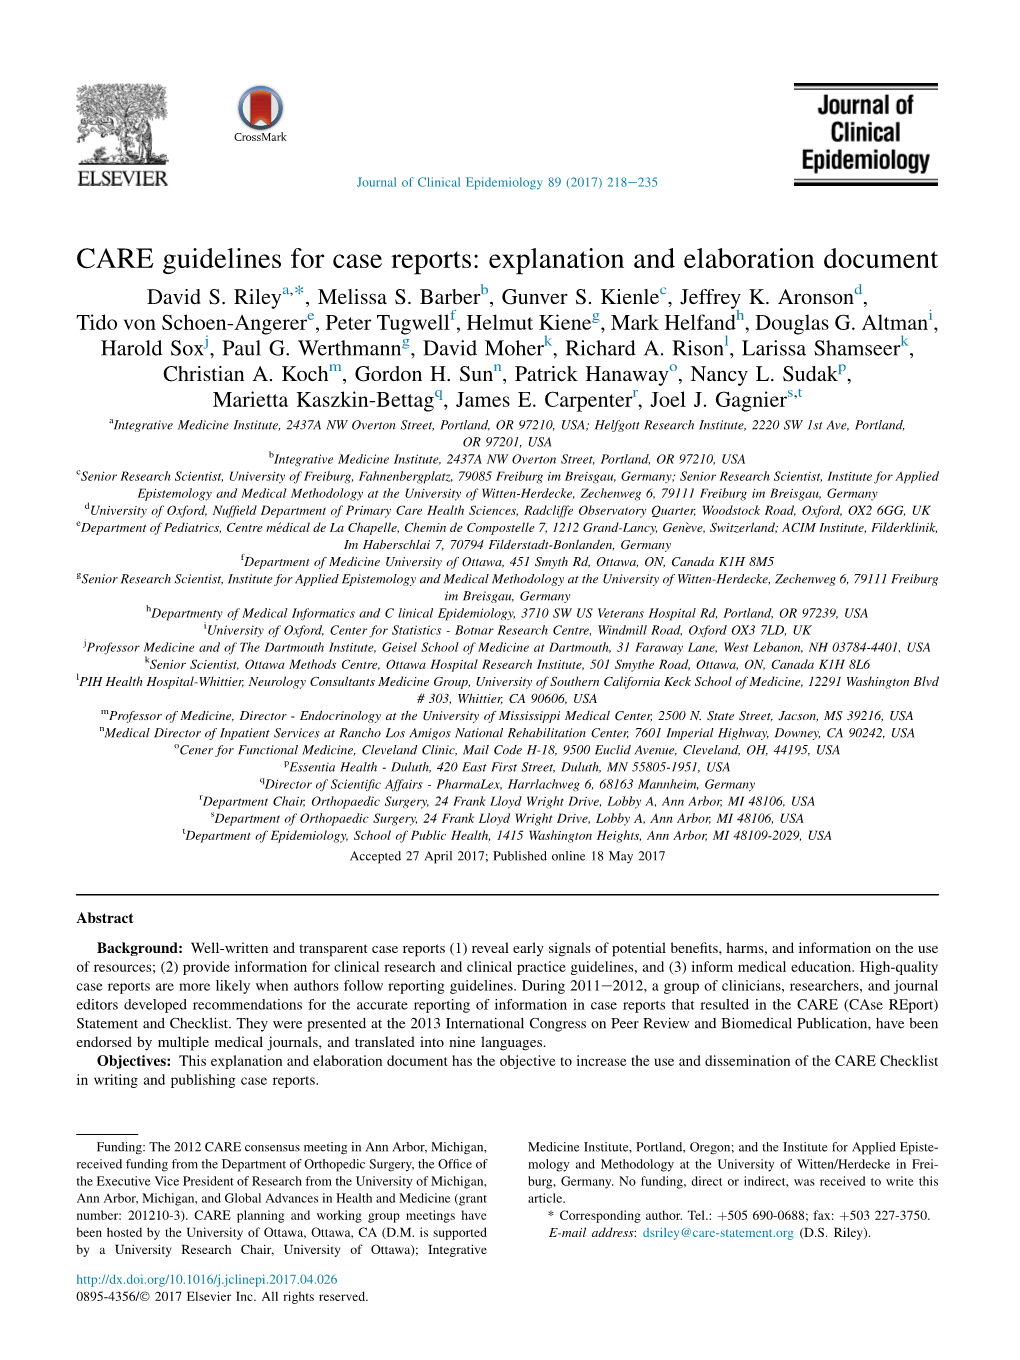 CARE Guidelines for Case Reports: Explanation and Elaboration Document David S